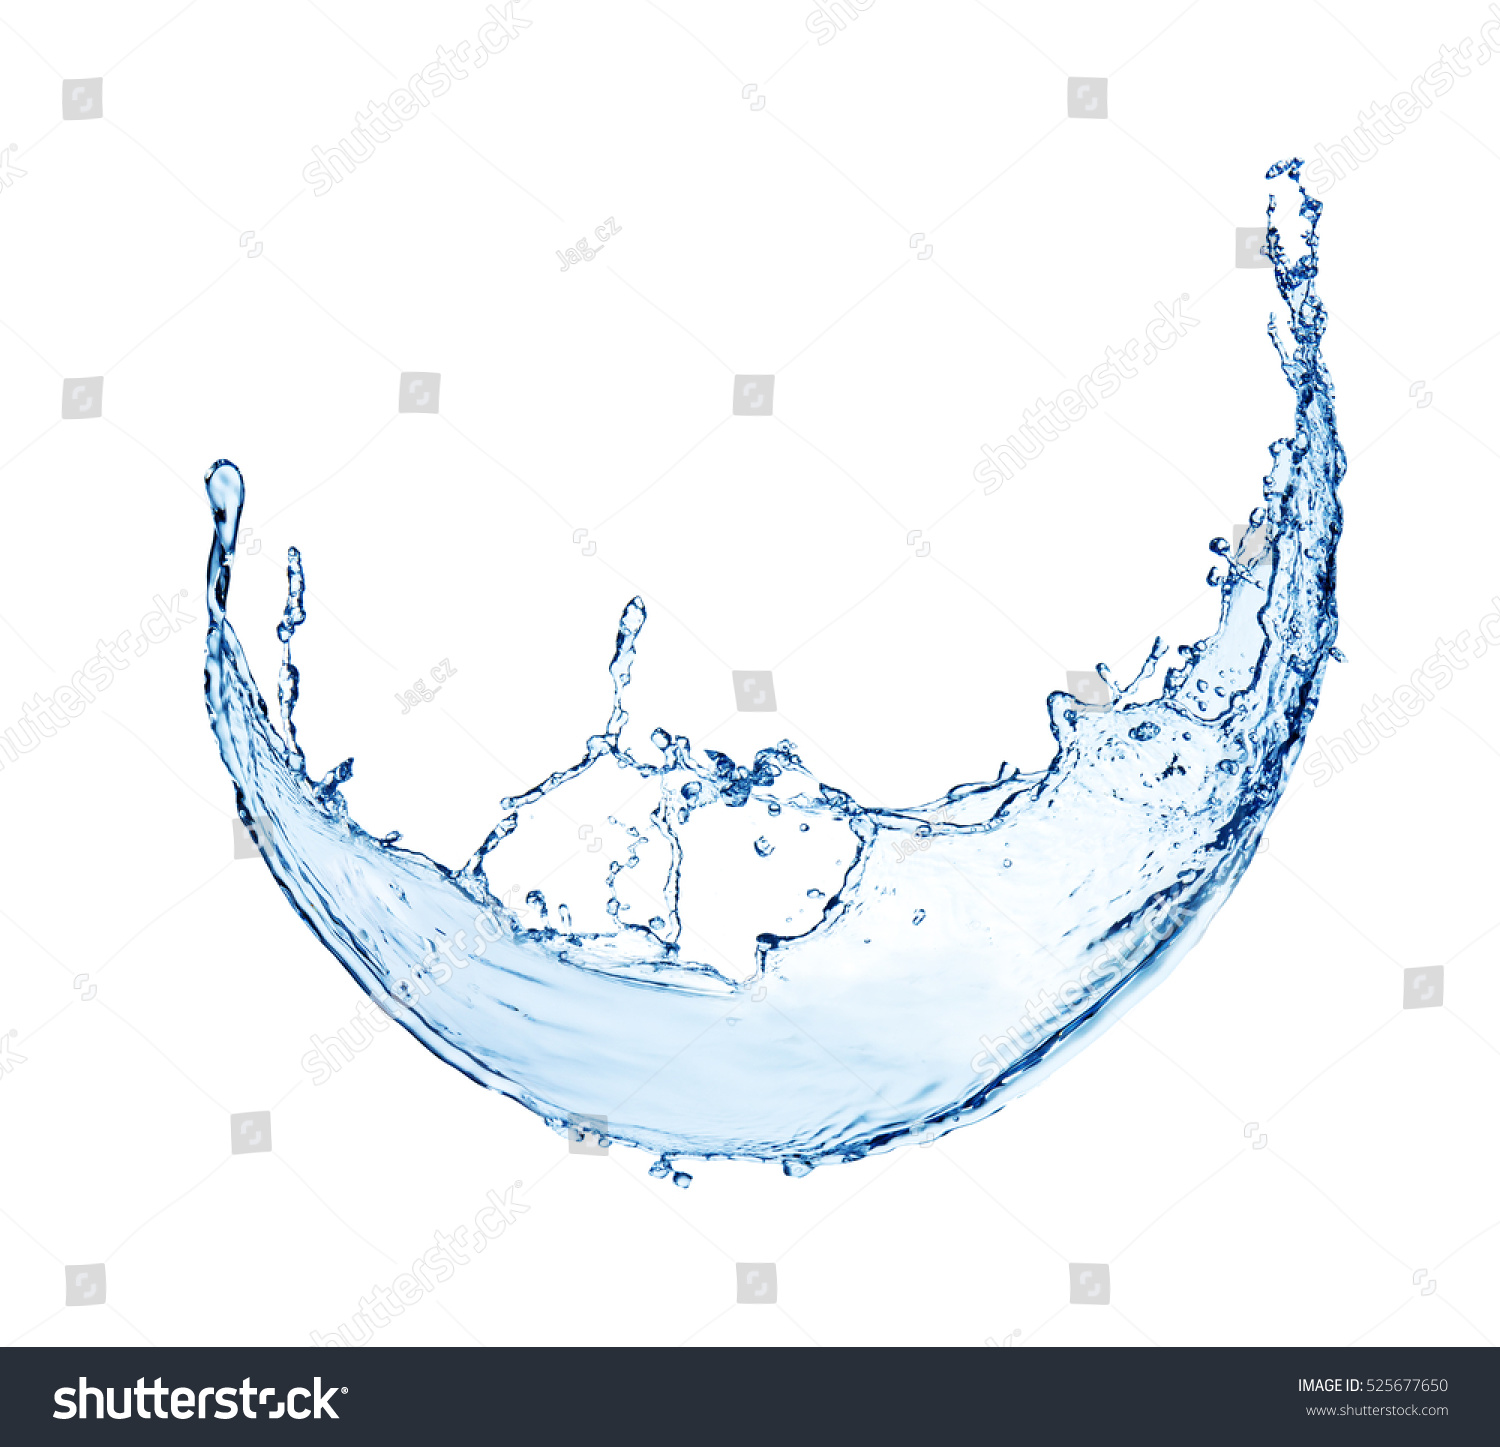 Blue Abstract Water Splash Isolated On Stock Photo Shutterstock